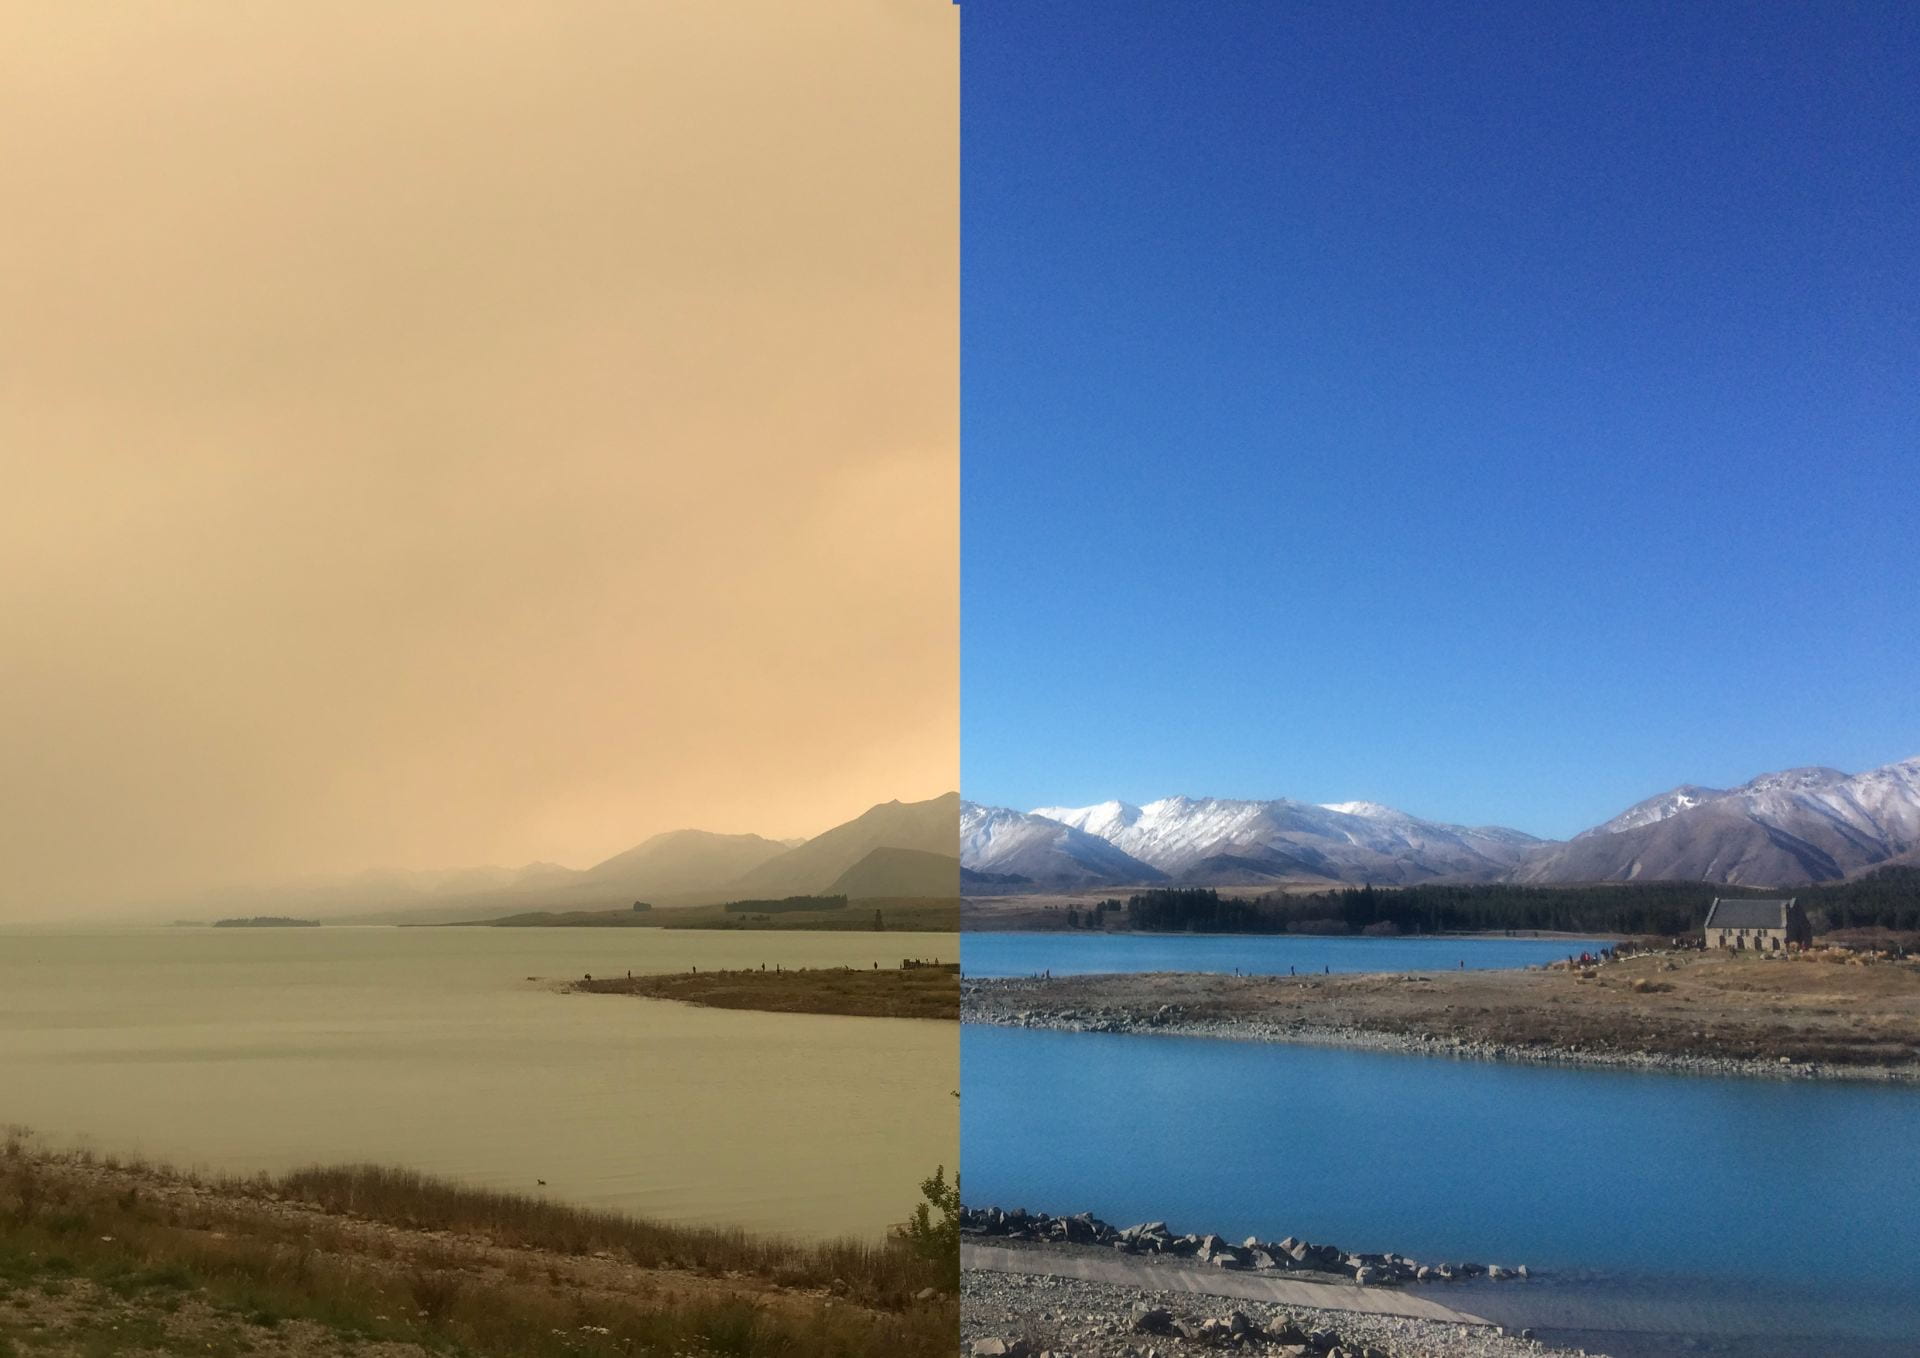 Dual image, left image is a sepia-tone image of a landscape with a body of water and mountains. Image on the right is a similar backdrop with stronger colours